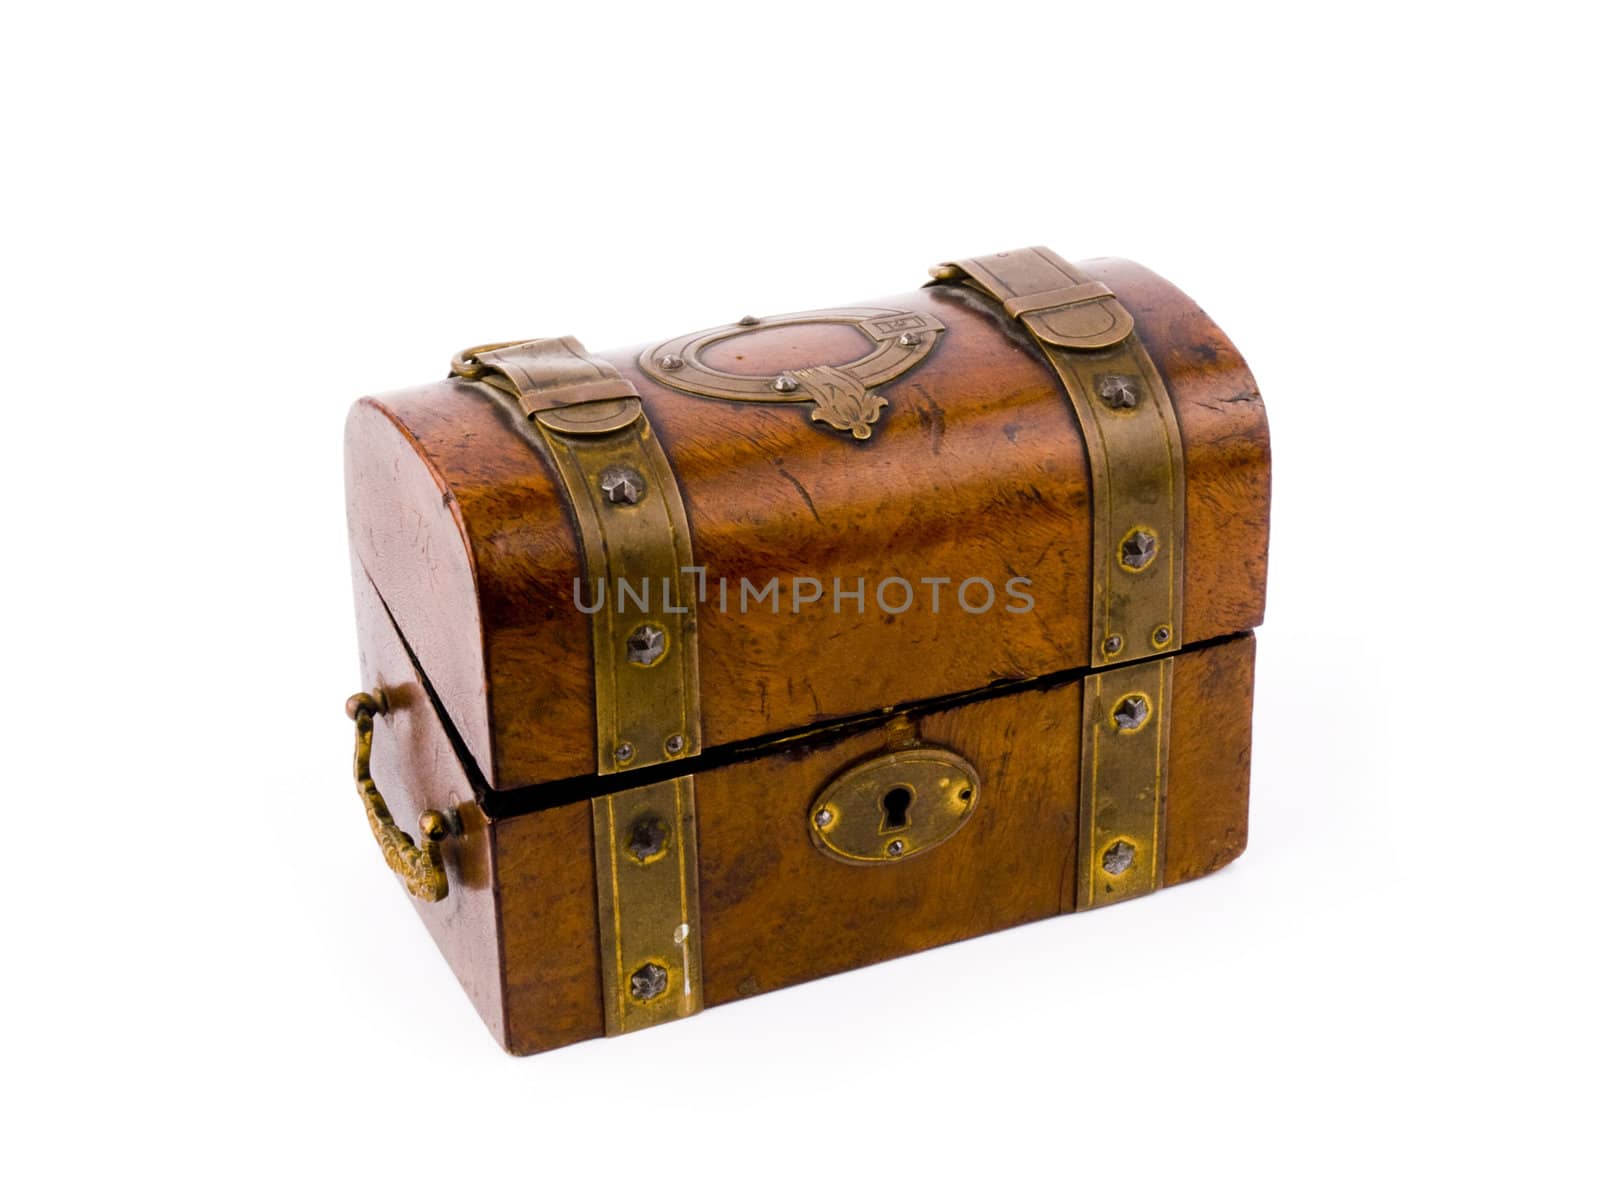 Old-fashioned wooden chest on white background.